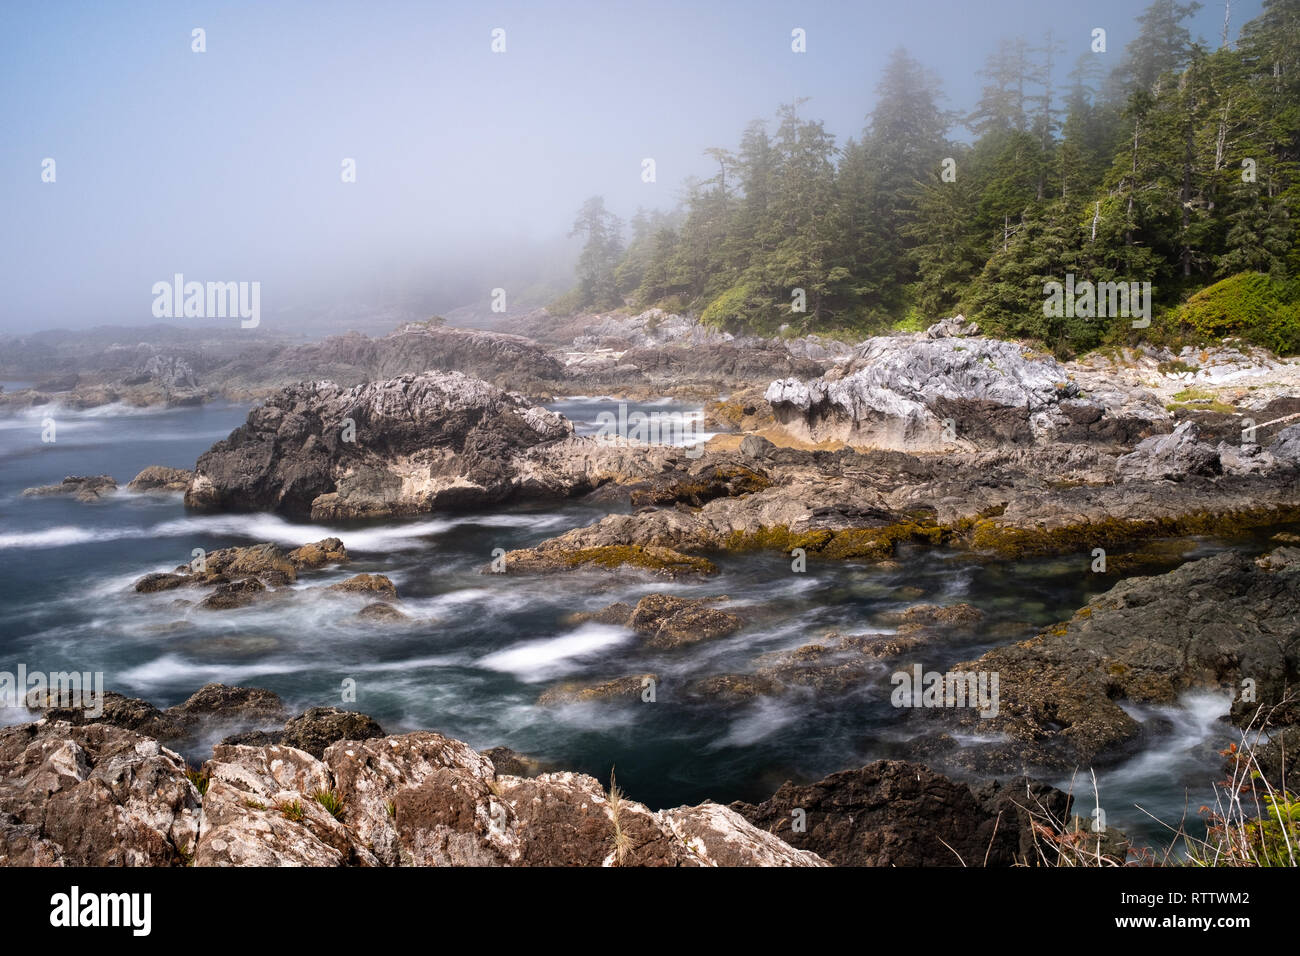 Wild Pacific Rim Trail, Ucluelet, on the Ucluelet Peninsula on the west coast of Vancouver Island in British Columbia, Canada. Mist lifting over the r Stock Photo